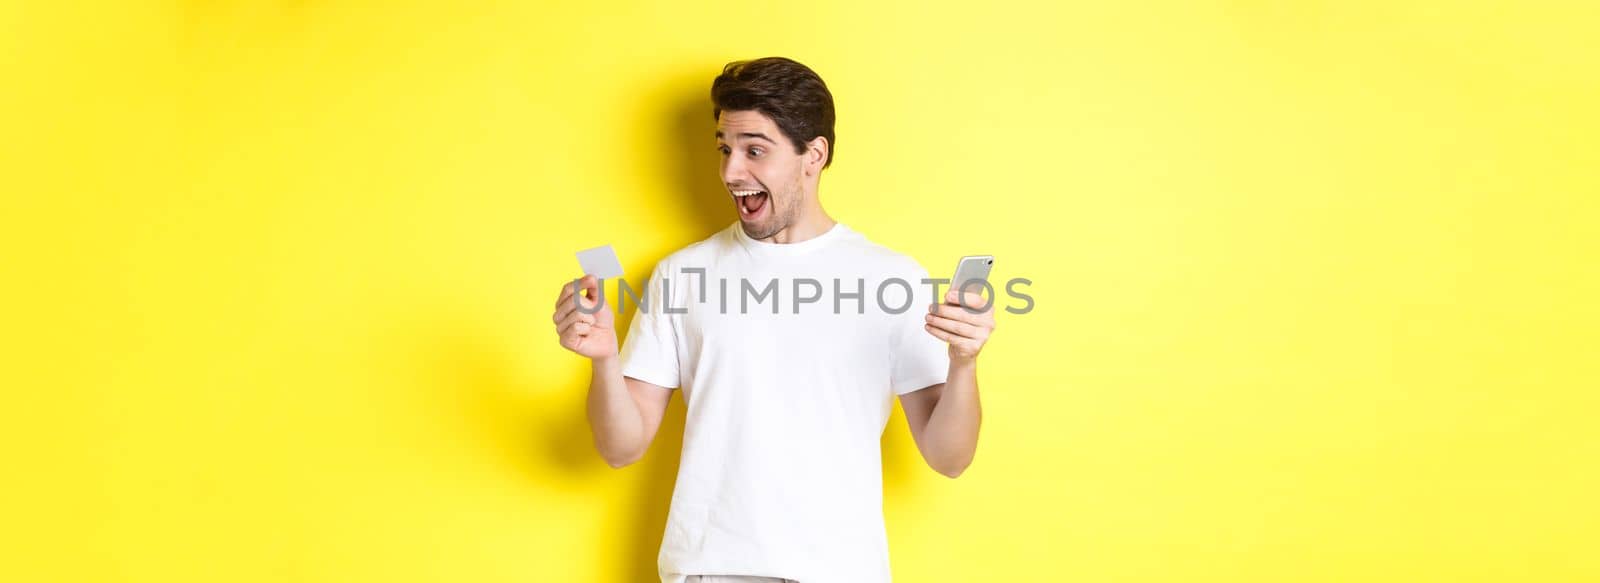 Surprised guy holding smartphone and credit card, online shopping on black friday, standing over yellow background.